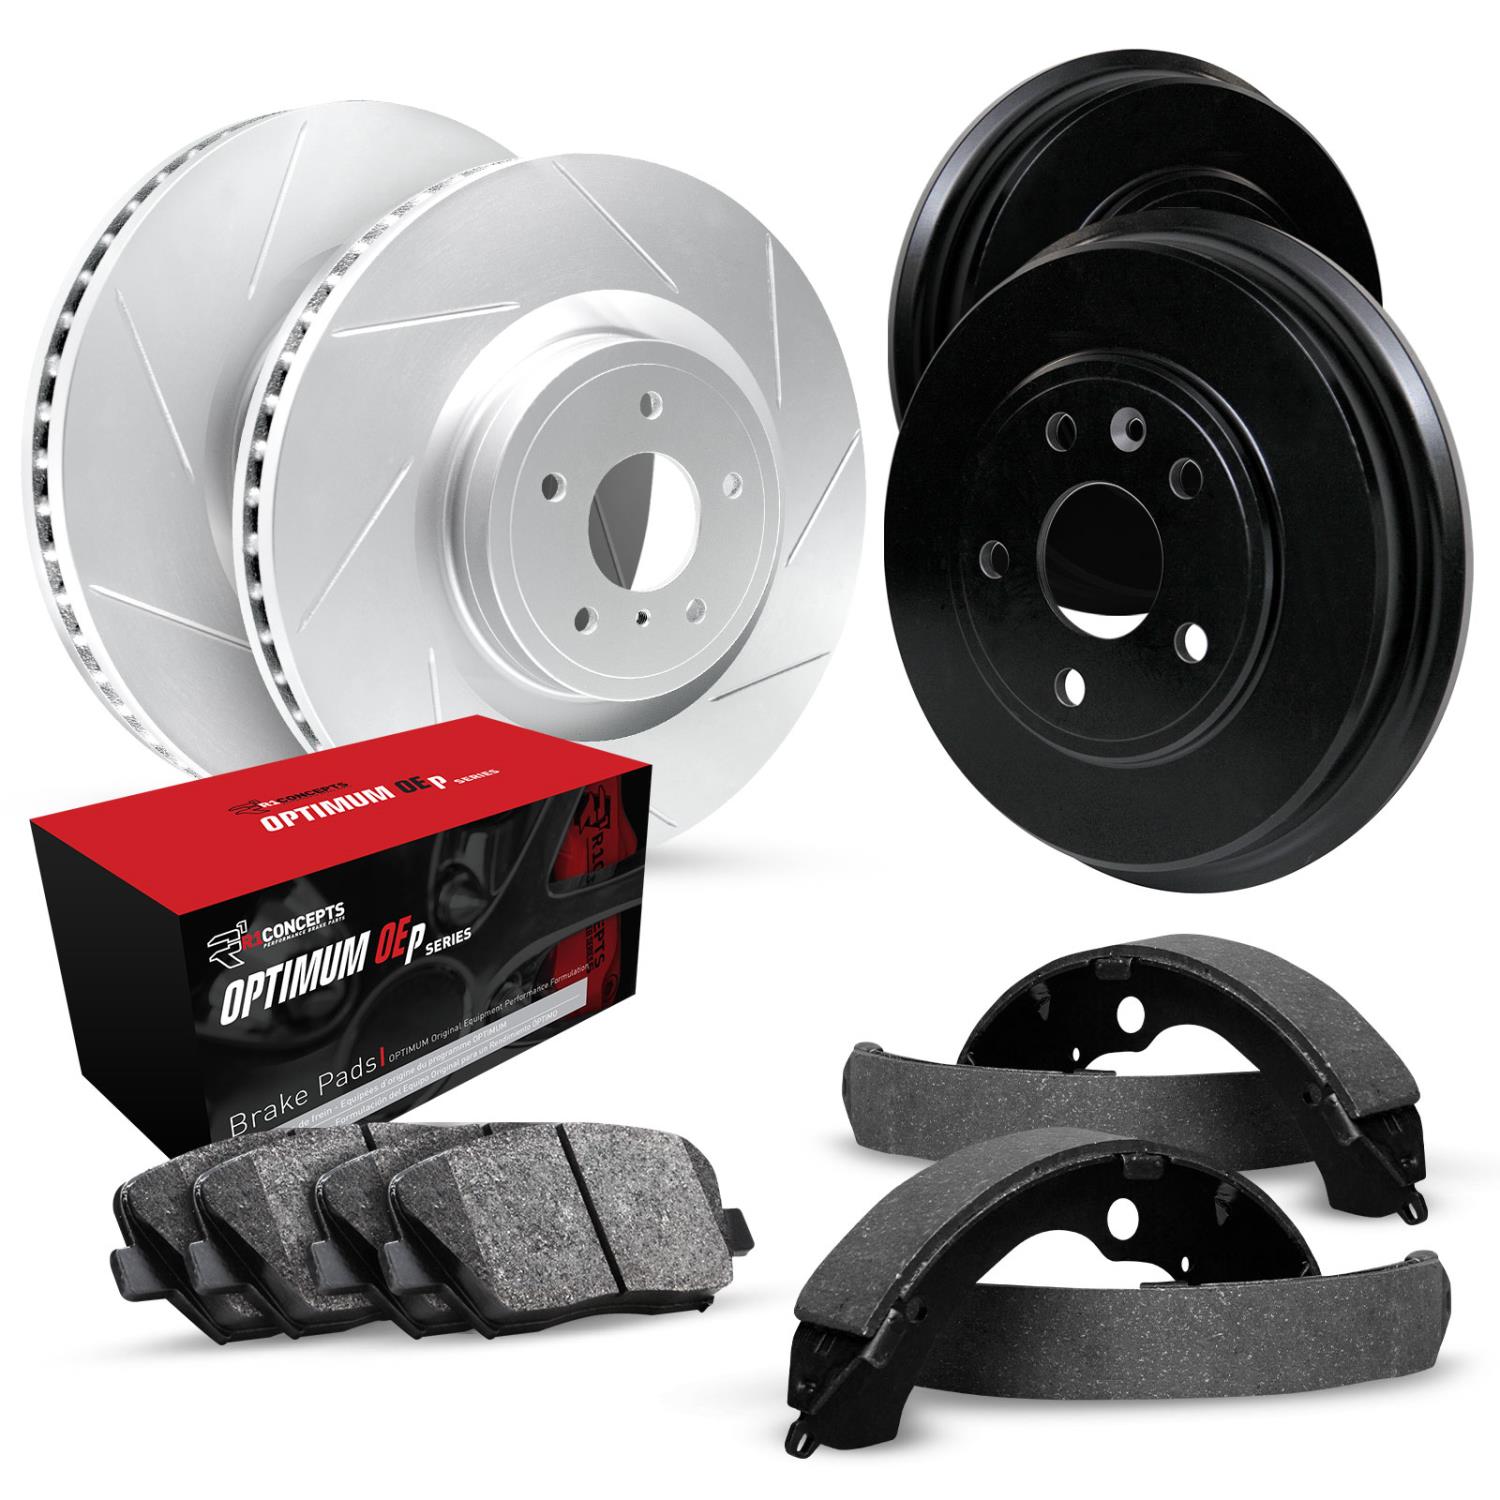 GEO-Carbon Slotted Brake Rotor & Drum Set w/Optimum OE Pads & Shoes, 1992-2000 GM, Position: Front & Rear